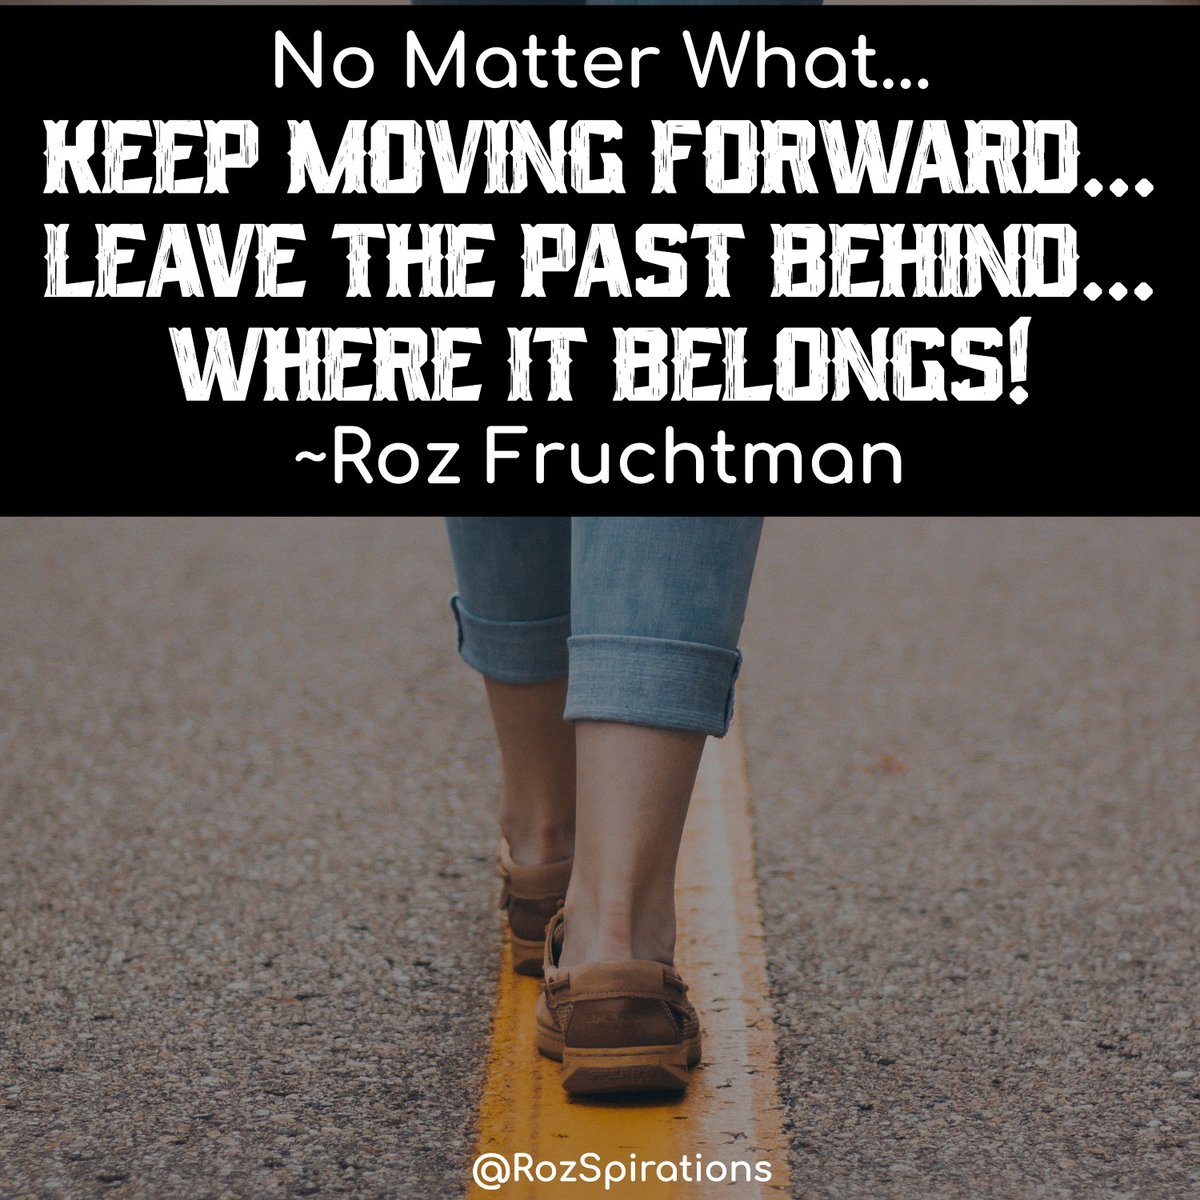 No Matter What... KEEP MOVING FORWARD... LEAVE THE PAST BEHIND... WHERE IT BELONGS! ~Roz Fruchtman #ThinkBIGSundayWithMarsha #RozSpirations #joytrain #lovetrain #qotd THINK ABOUT IT... You would not walk backwards. Why would you think backwards?